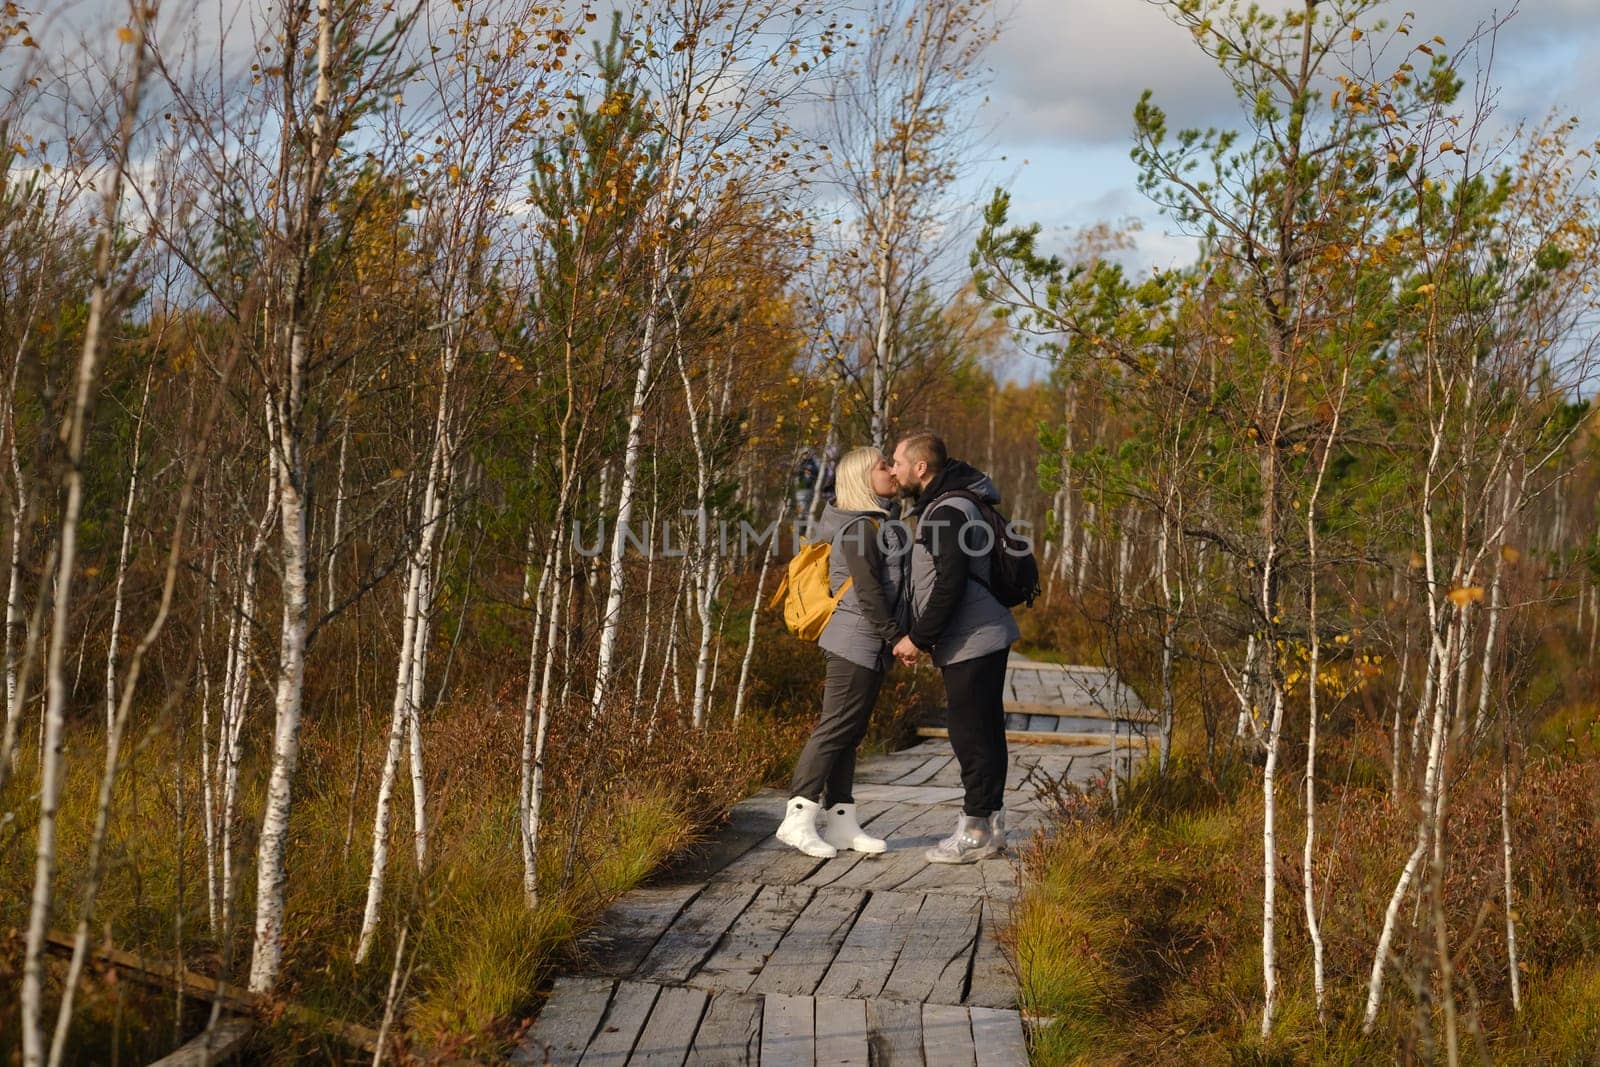 Tourists with backpacks kiss a wooden path in a swamp in Yelnya, Belarus.